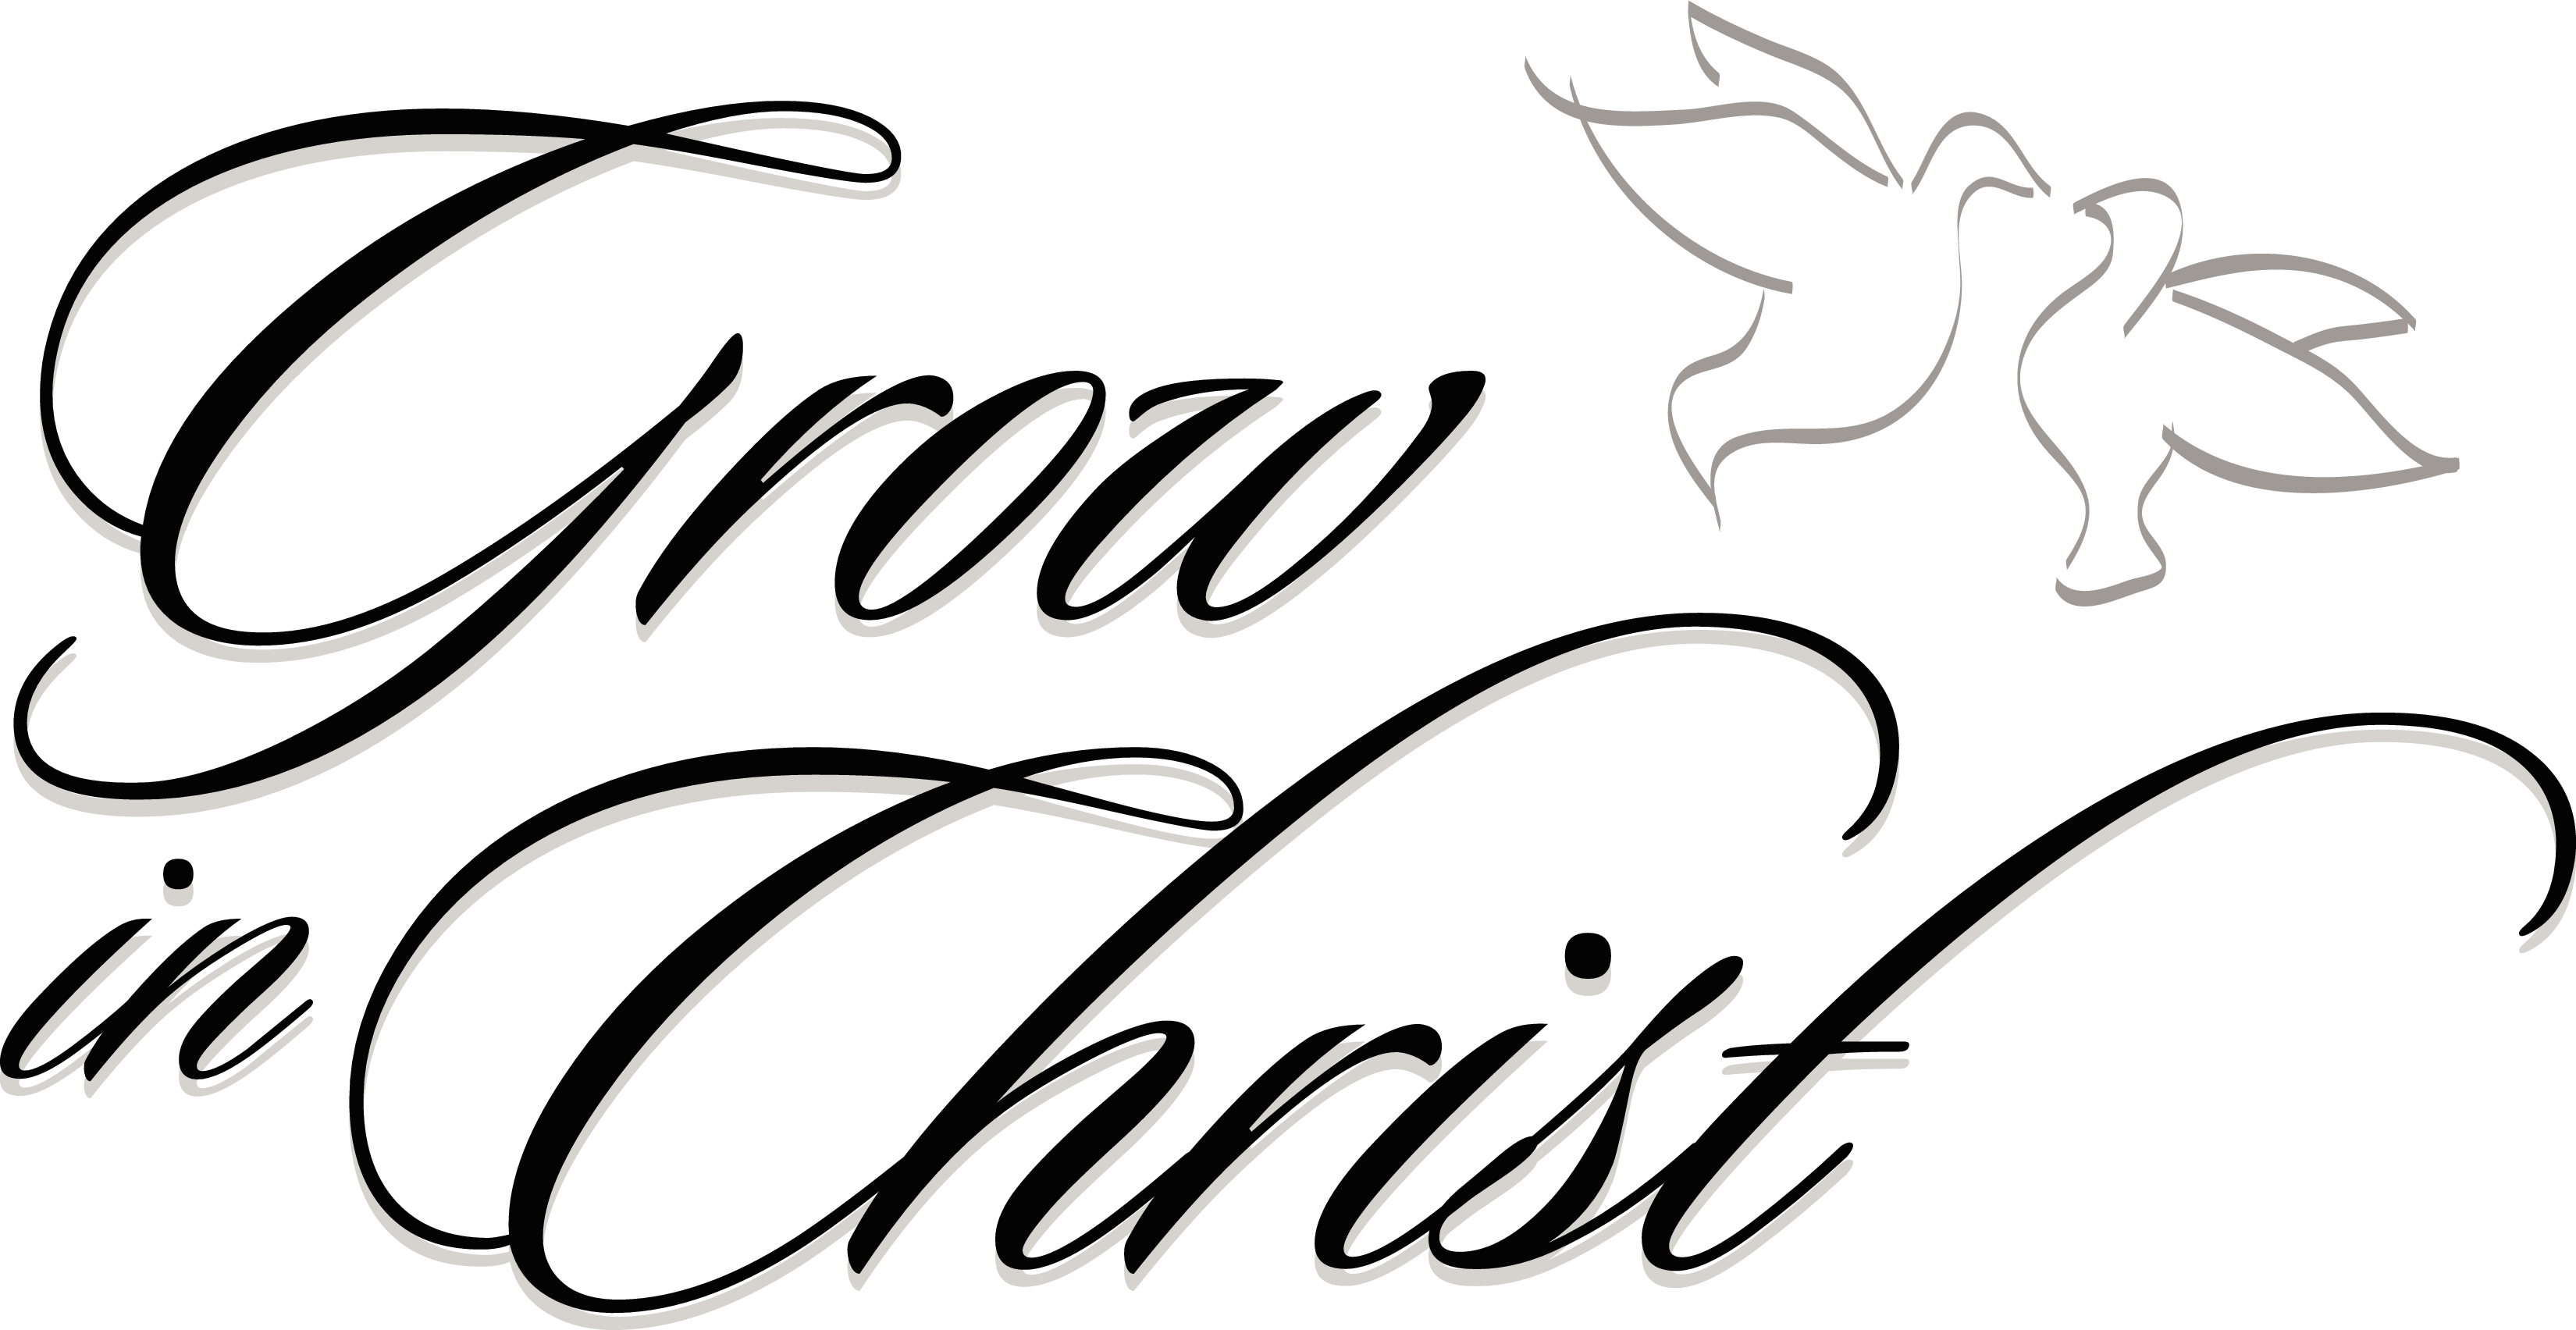 christian-clip-art-free-download-images